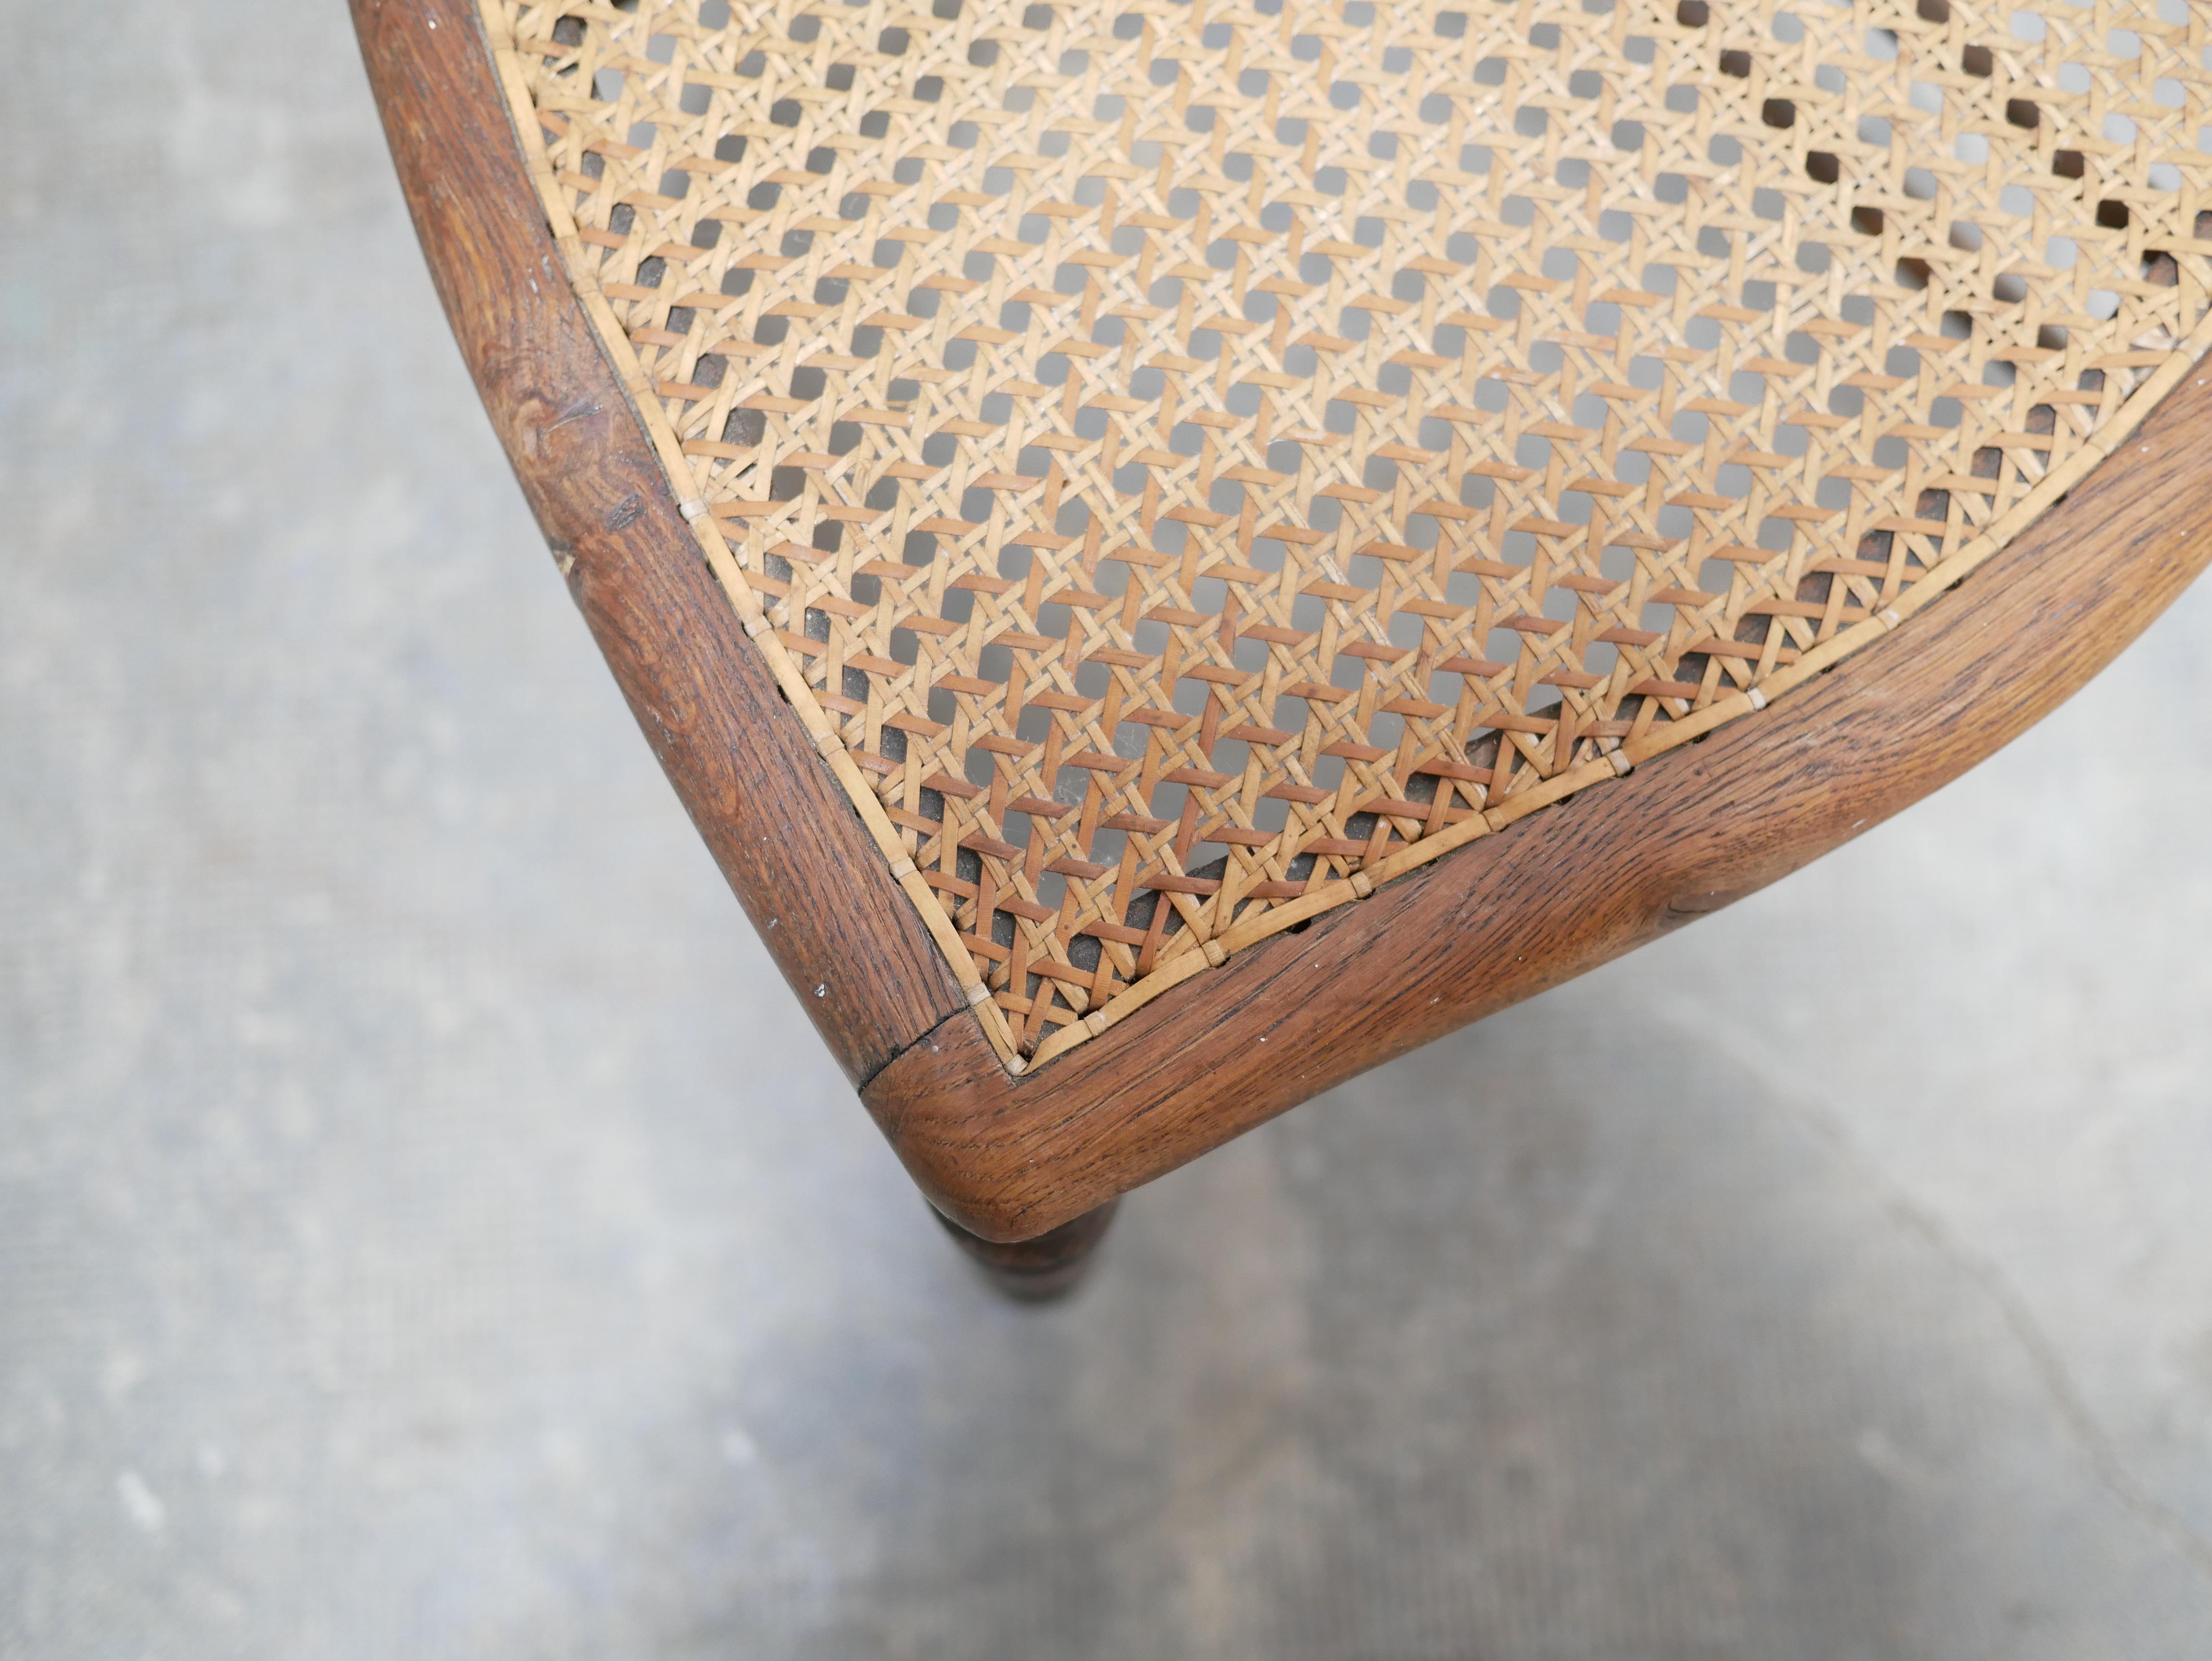 Rattan Old wooden cane chair For Sale